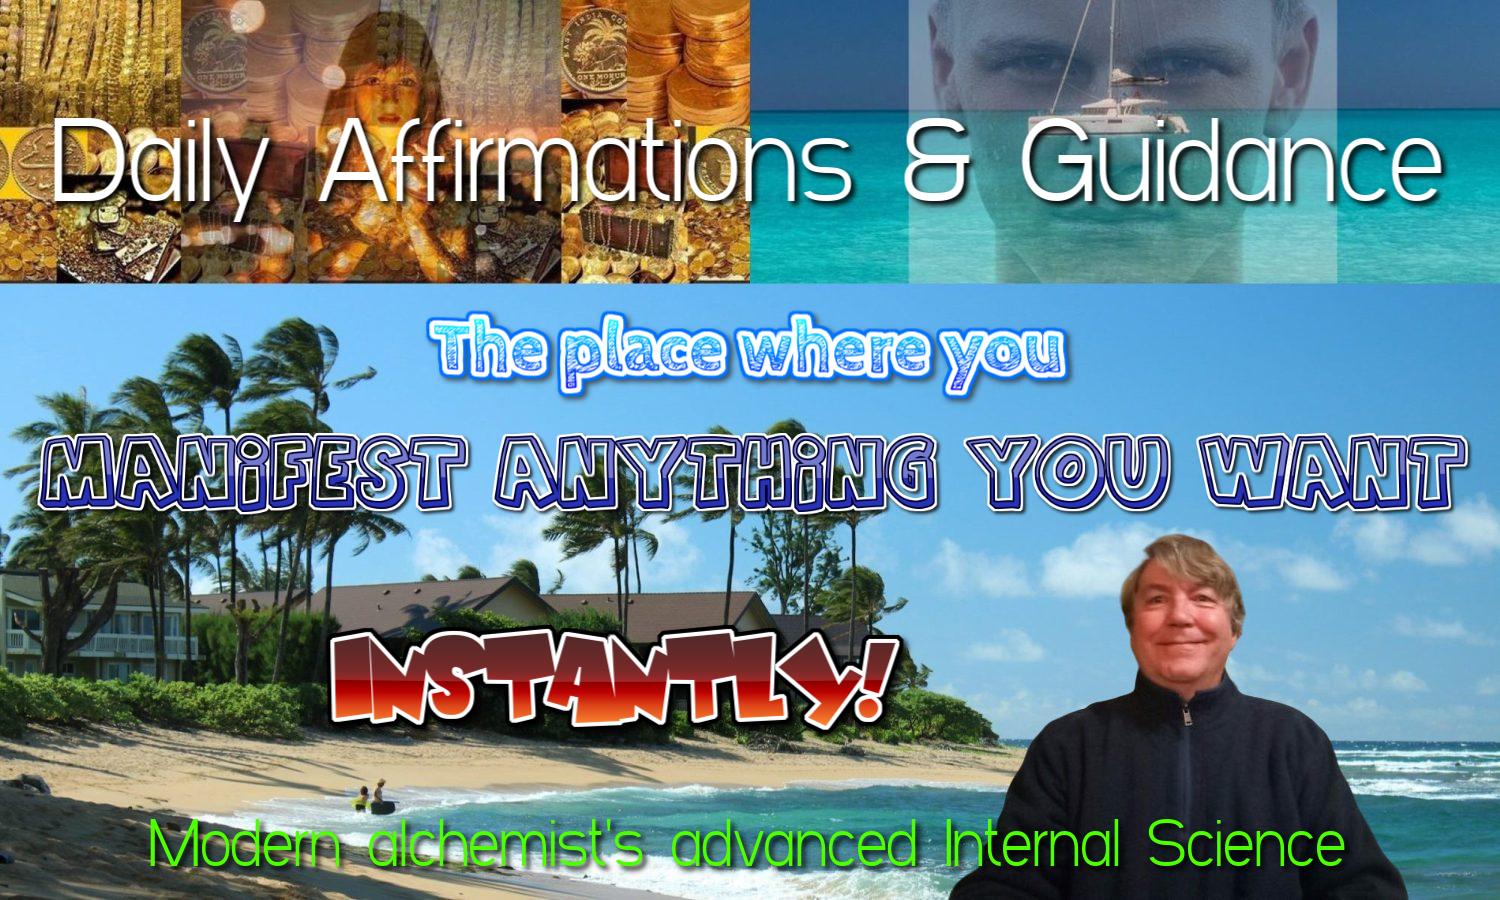 How do I get the best metaphysical affirmations and daily guidance